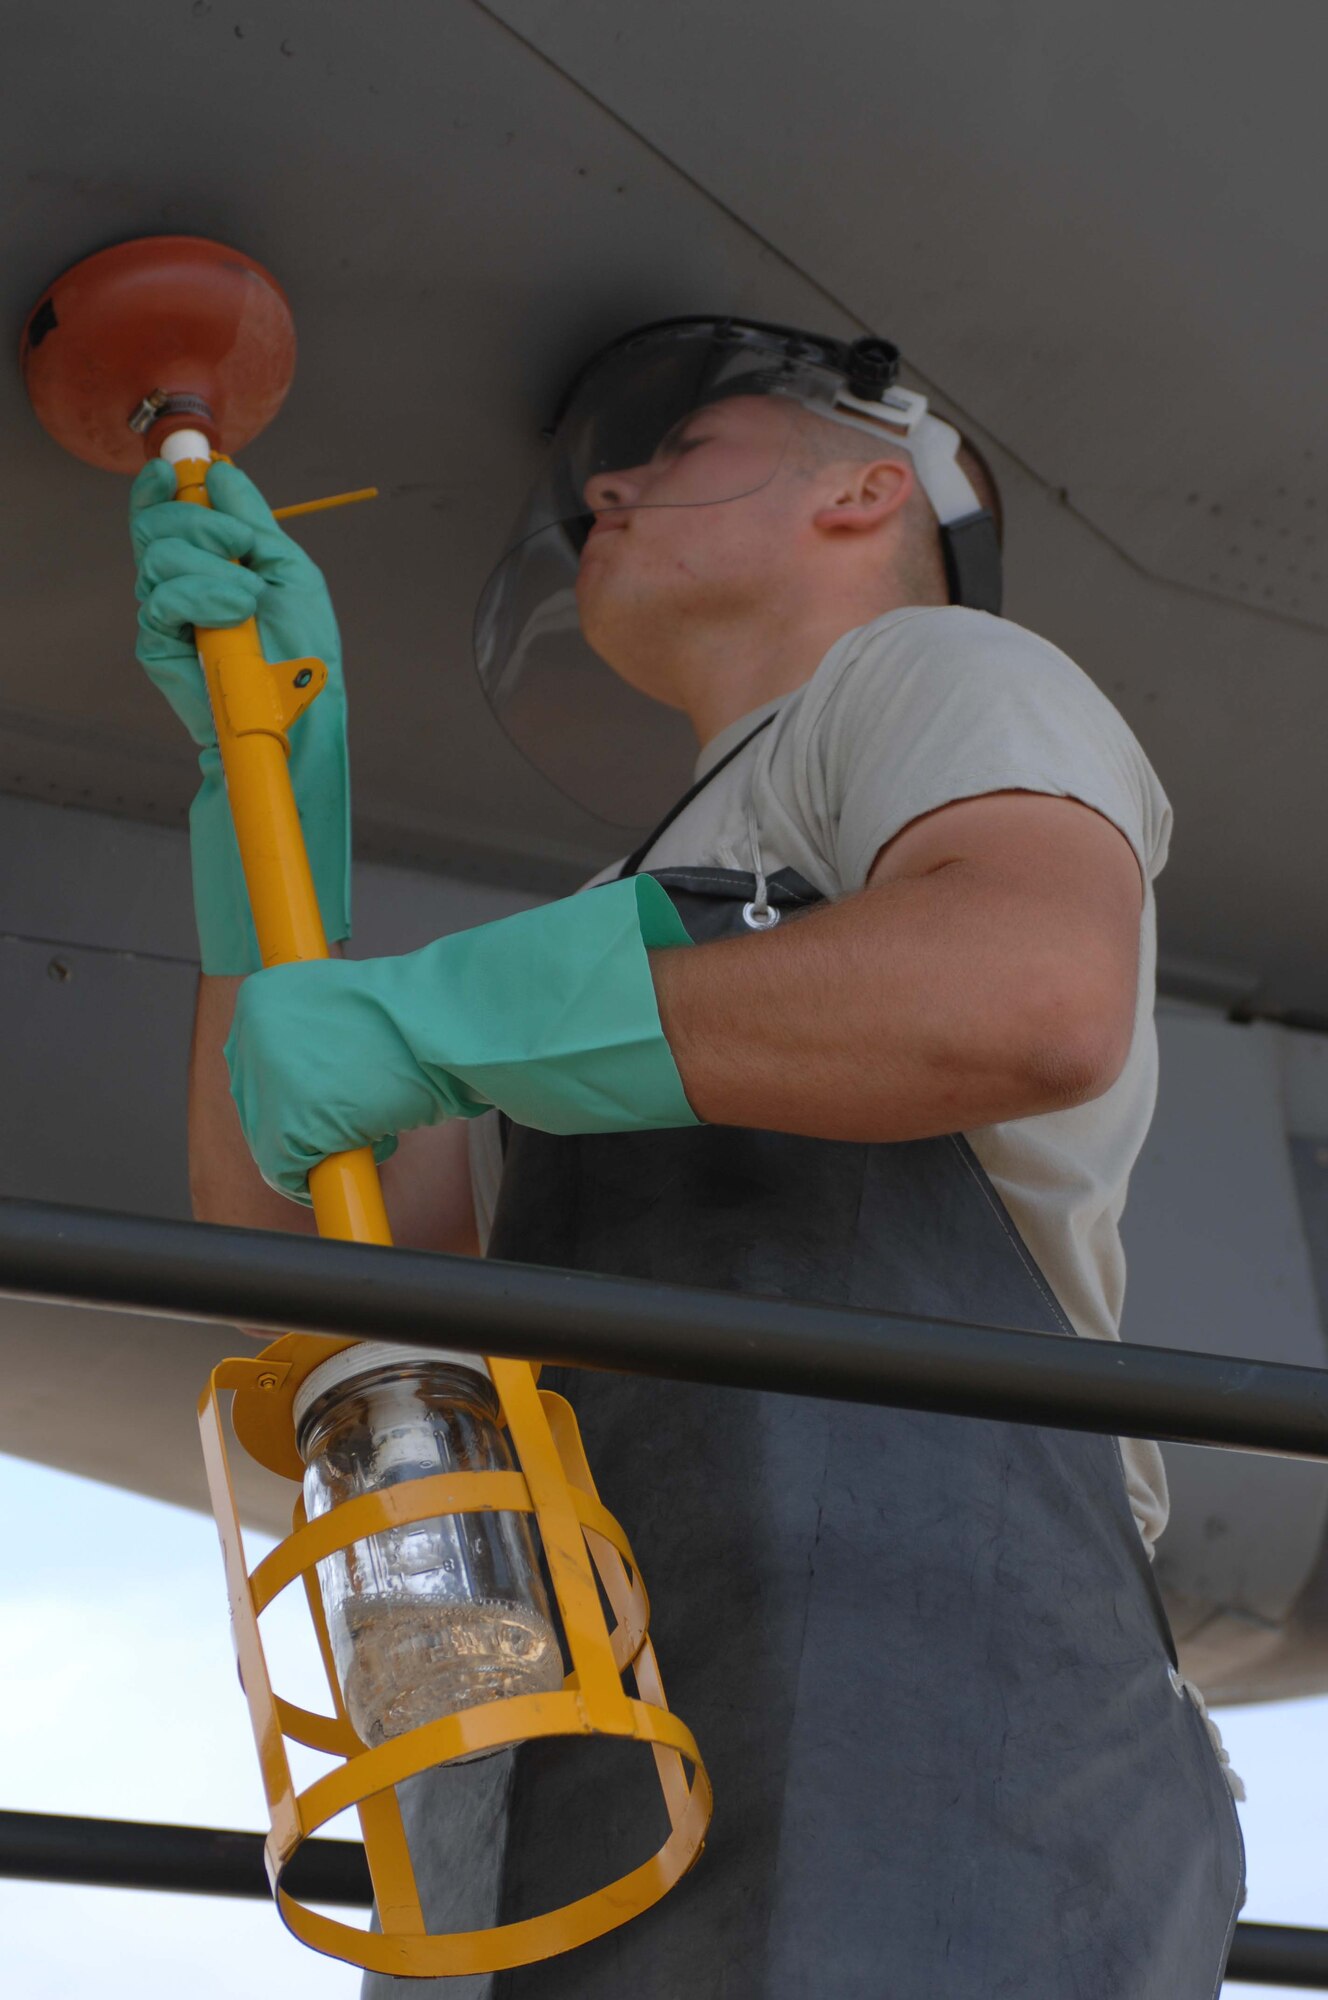 SEYMOUR JOHNSON AIR FORCE BASE, N.C. - Airman Edward Quarter of the 916th Air Refueling Wing drains the fuel tank sumps on a KC-135R Stratotanker, June 23, 2008, Seymour Johnson Air Force Base, NC. Airman Quarter drains the fuel sumps to check if there is any water in the fuel tanks. (U.S. Air Force photo by Airman 1st Class Gino Reyes)